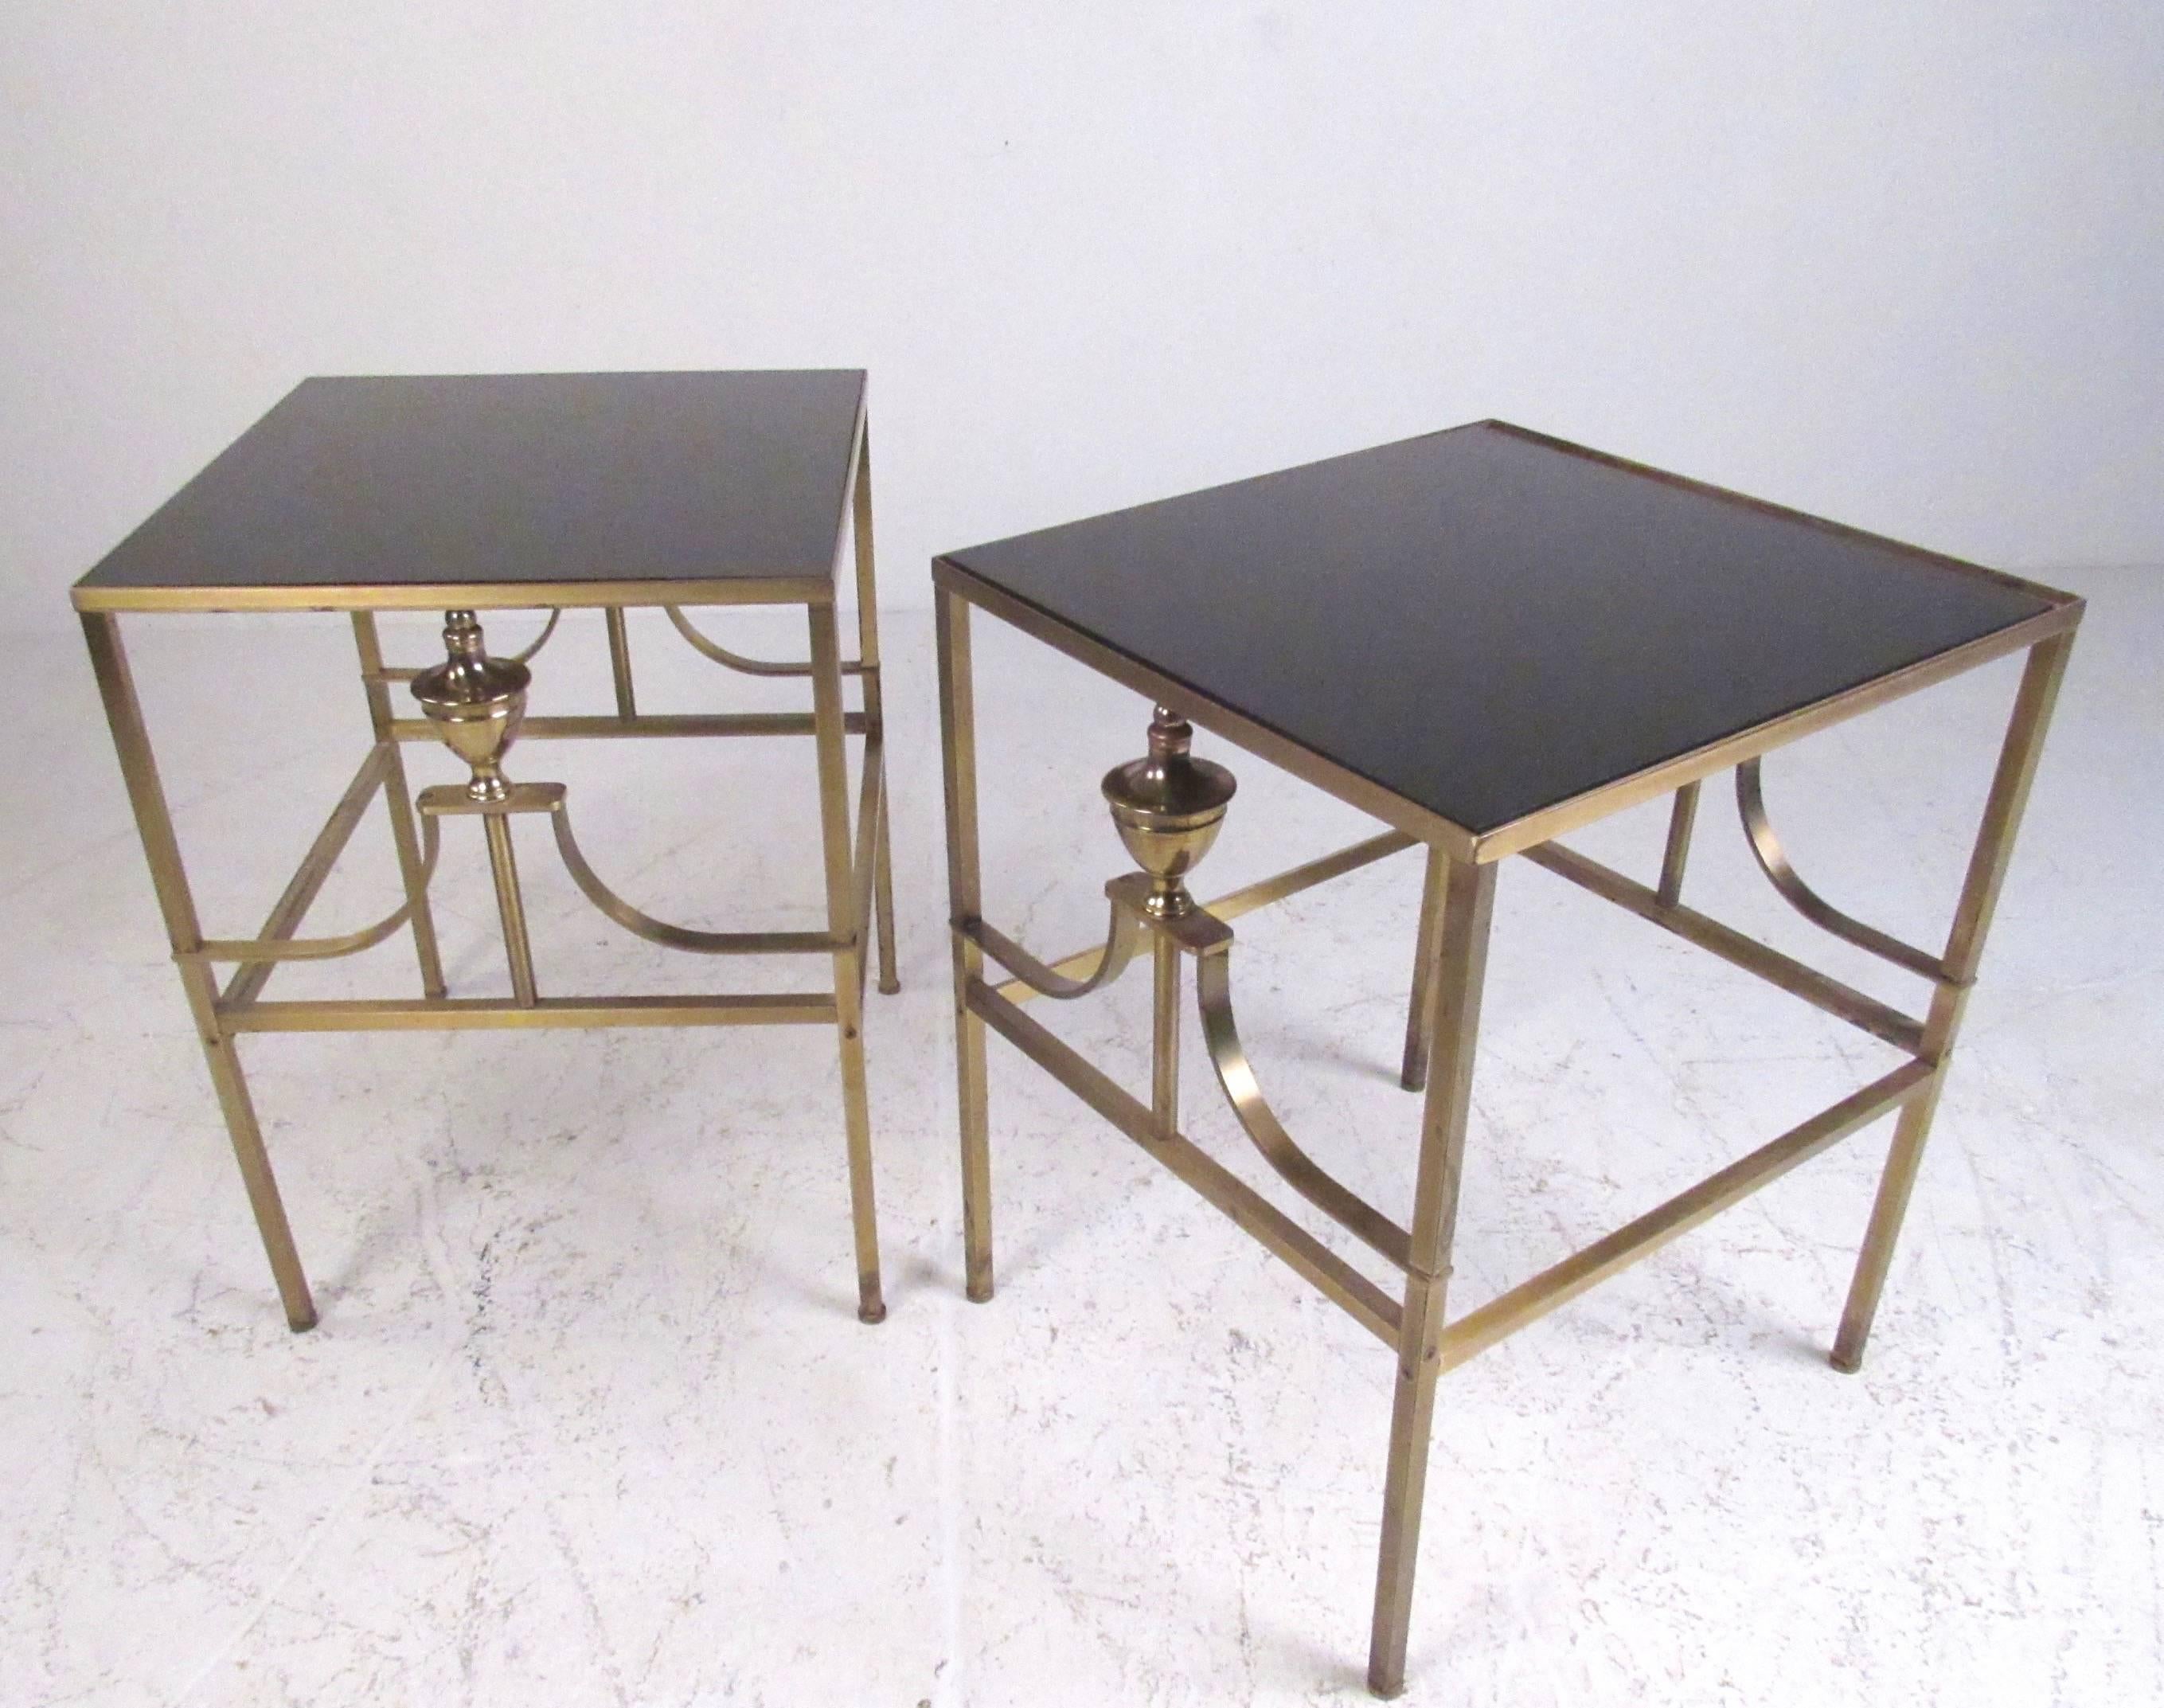 This stylish pair of vintage modern end tables boast elegant brass frames with ornate details. Patinated brass finish adds to the vintage charm of the Italian modern styled pair. Ideal pair of tables for use as sofa end tables, lamp tables, or